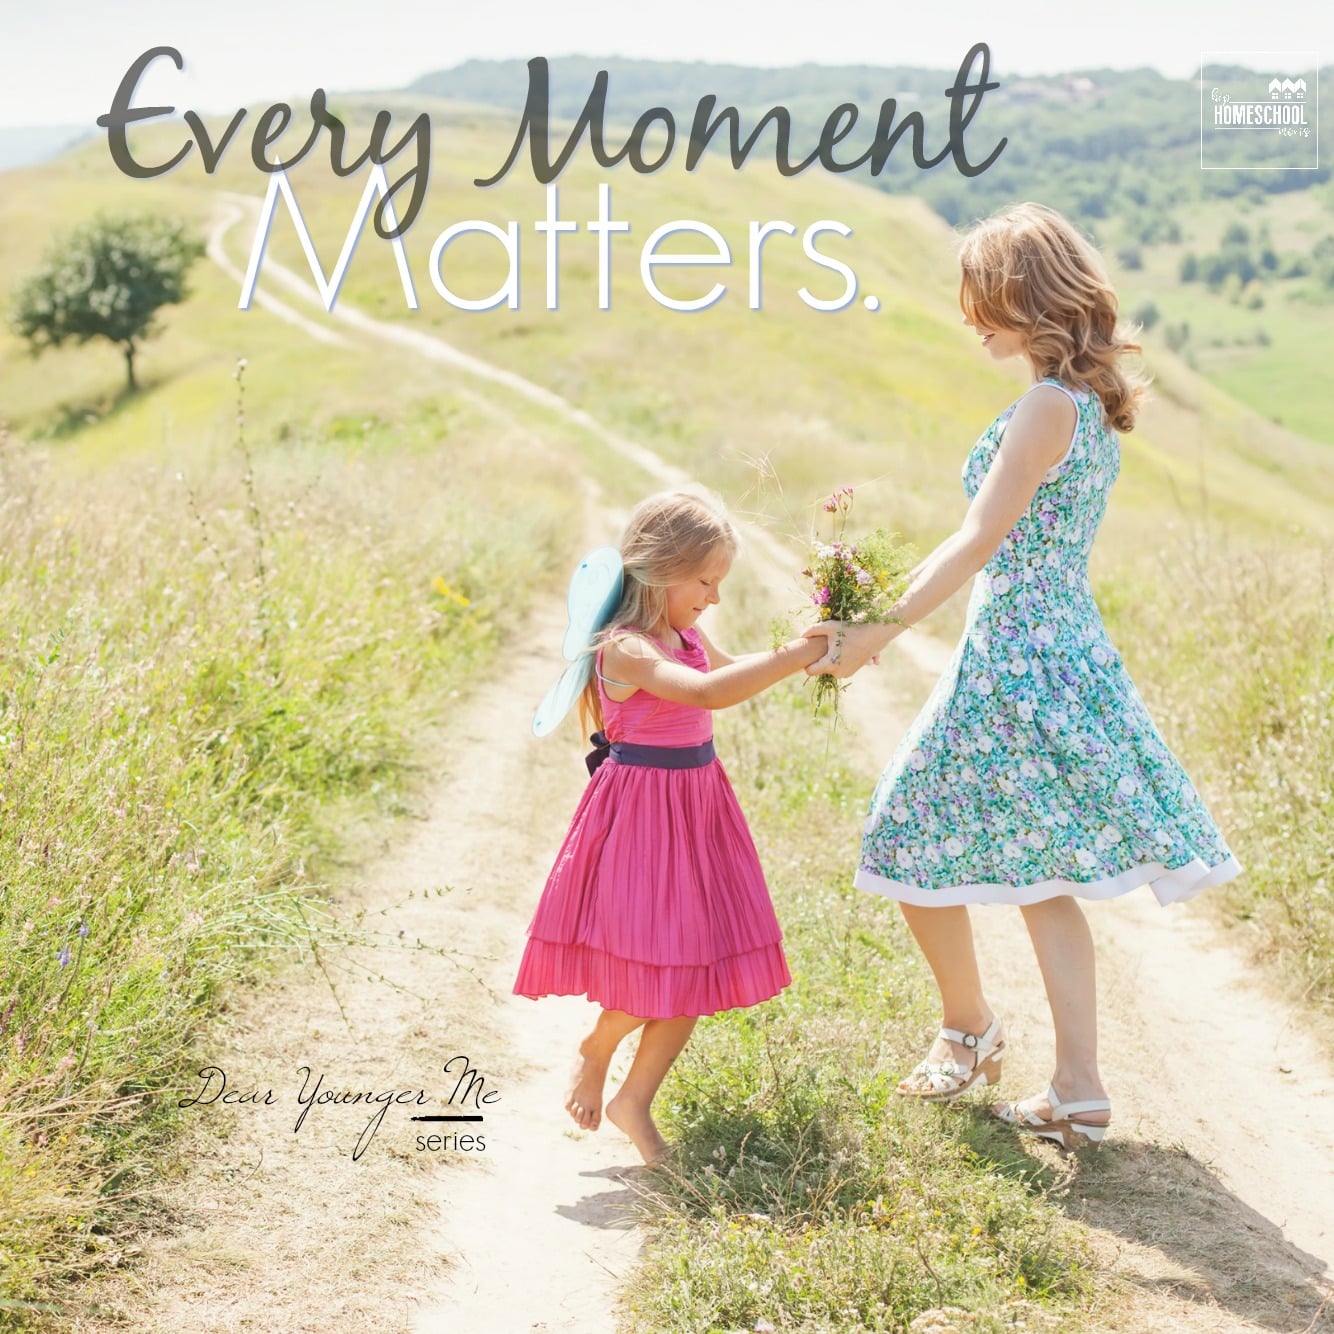 Dear Younger Me: Every Moment Matters